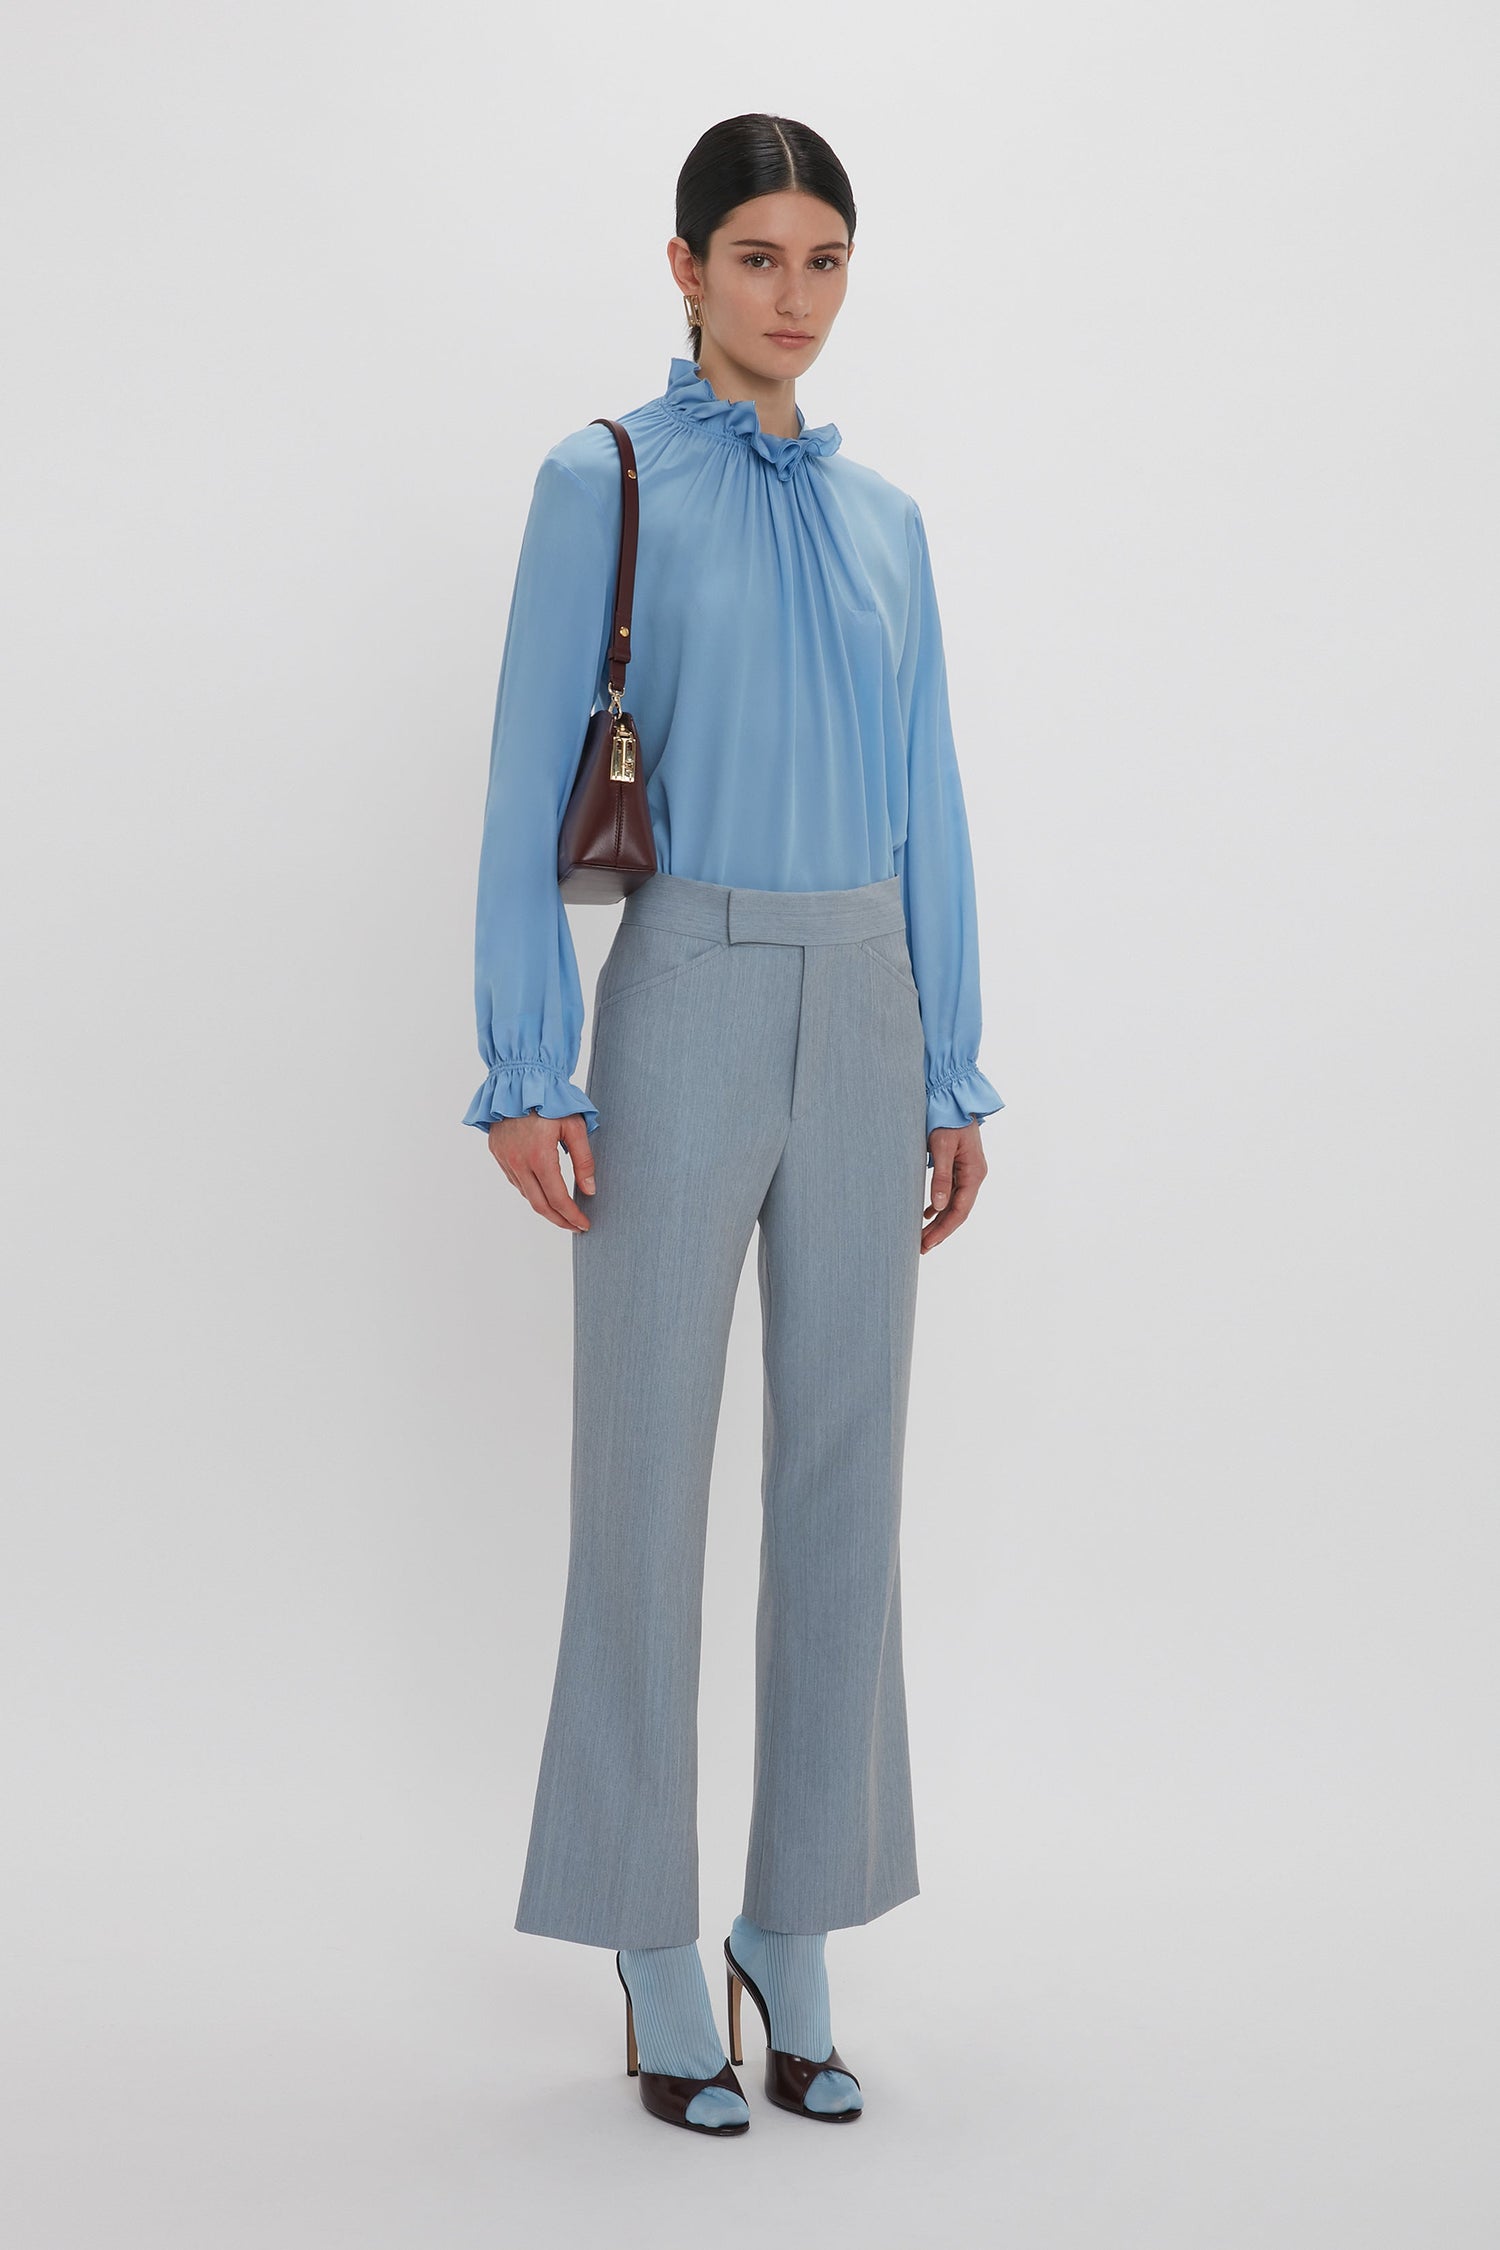 A person wearing a Victoria Beckham Exclusive Ruffle Neck Blouse in Cornflower Blue, gray trousers, and high-heeled shoes stands against a white background, carrying a small brown handbag over their shoulder.